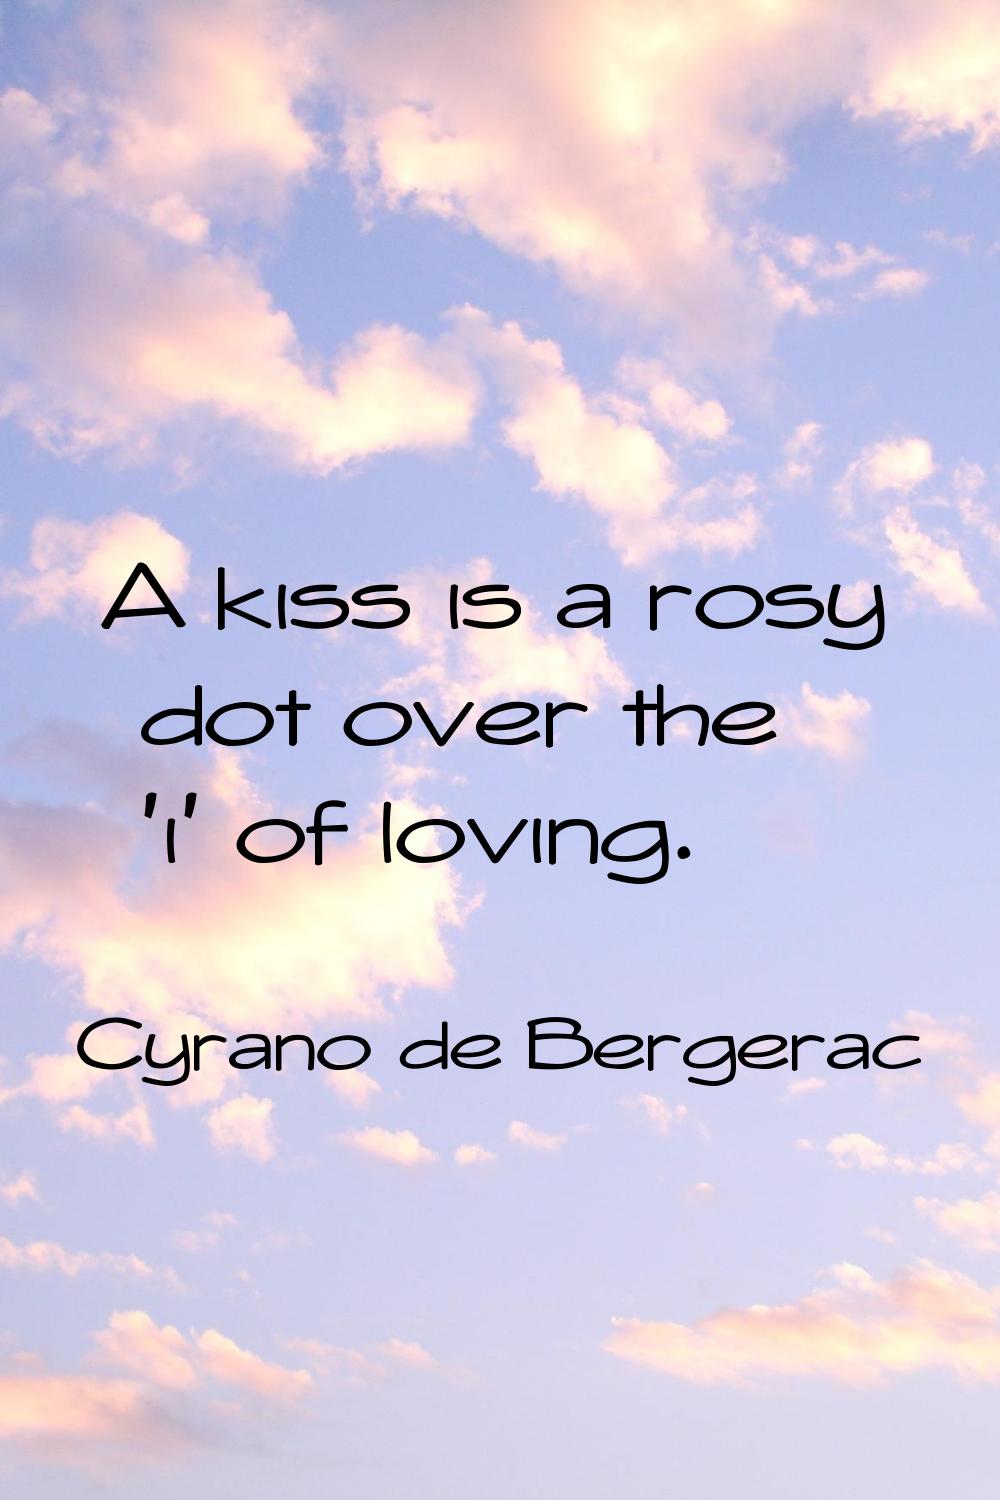 A kiss is a rosy dot over the 'i' of loving.